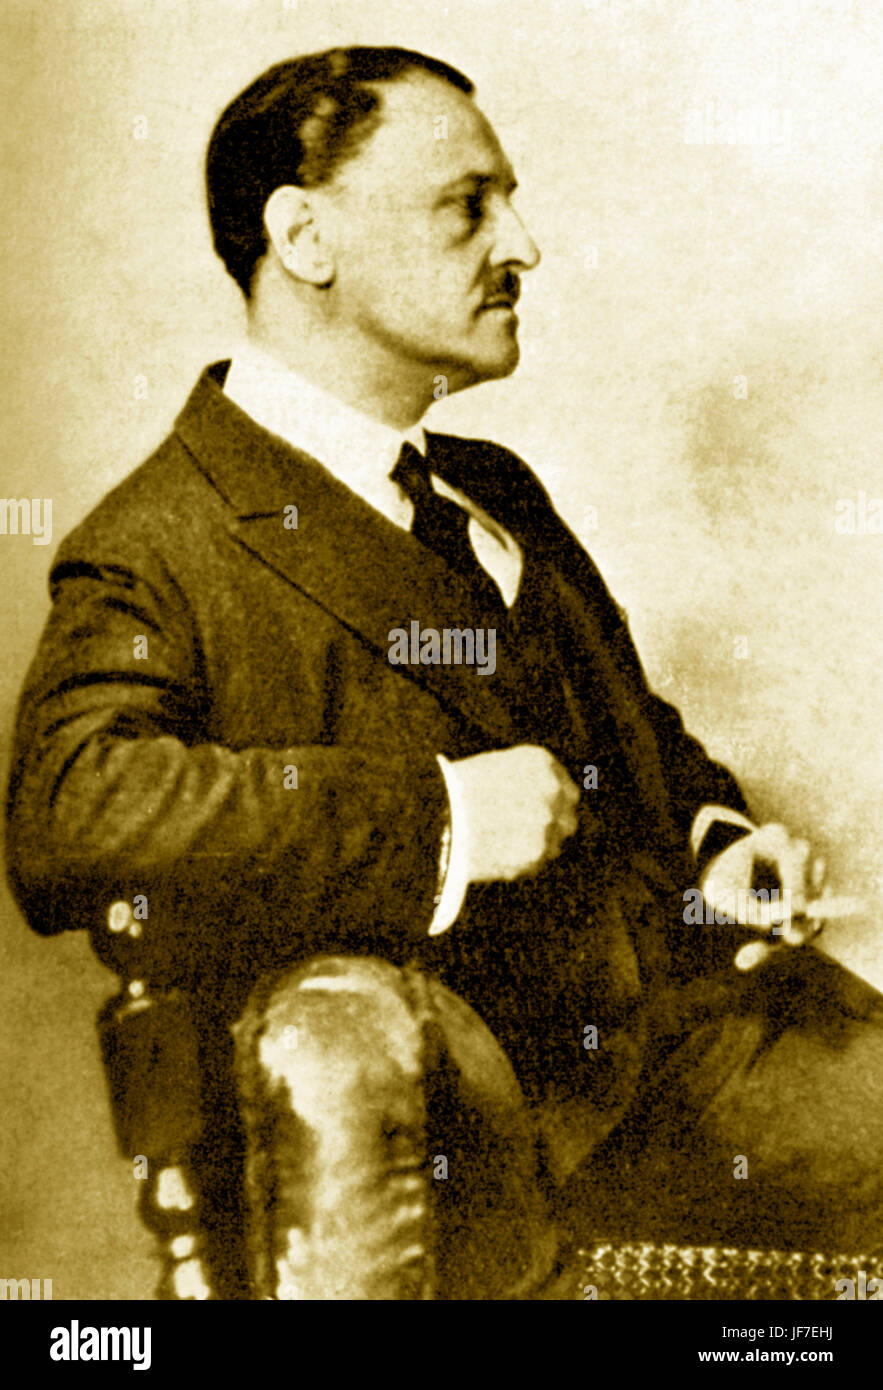 Somerset Maugham - portrait of the British playwright, novelist, and short story writer, c. 1933. 25 January 1874 - 16 December 1965. Stock Photo